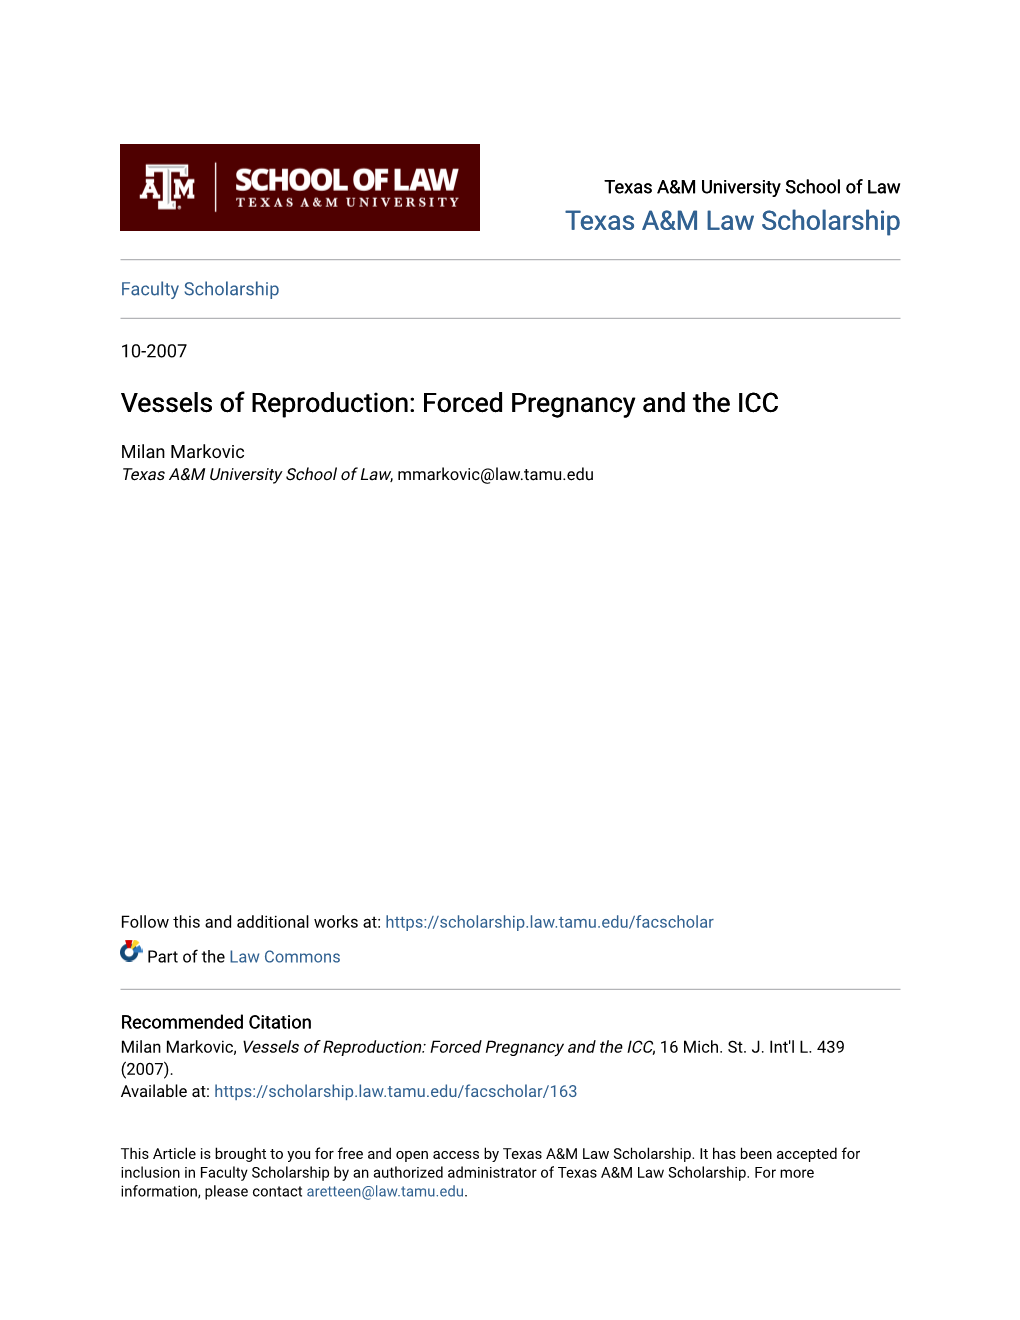 Forced Pregnancy and the ICC